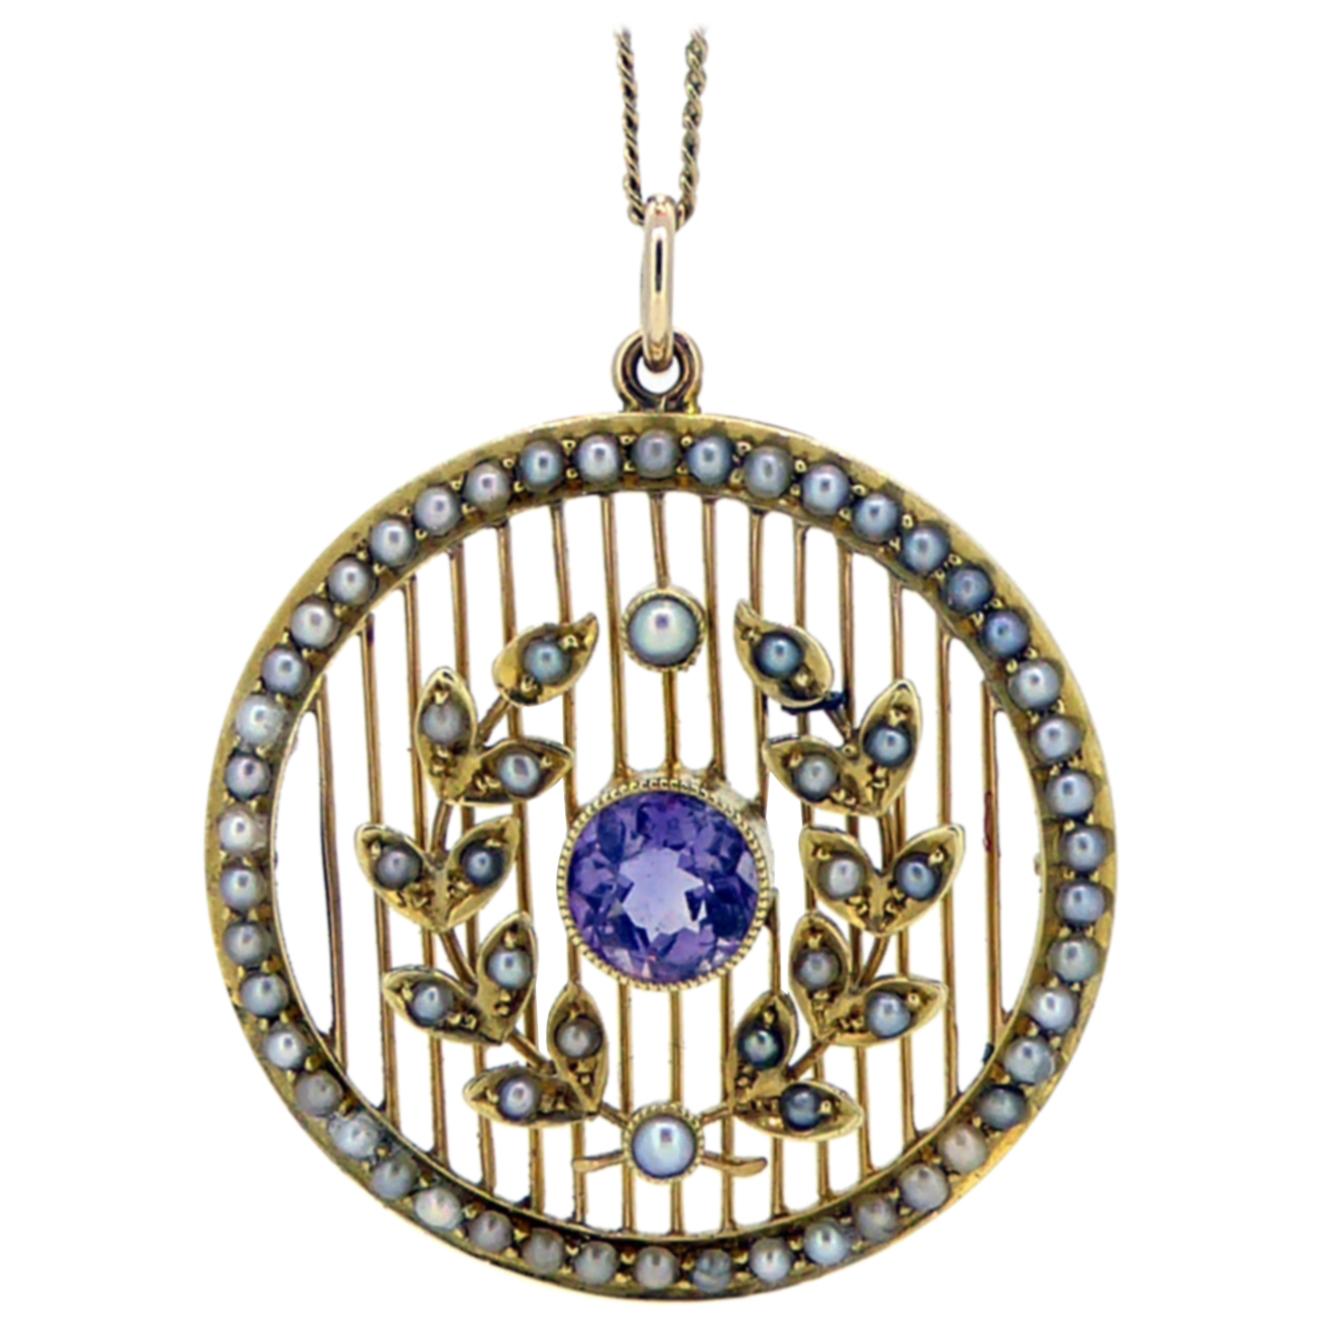 Antique Edwardian Amethyst and Pearl Pendant, circa 1910